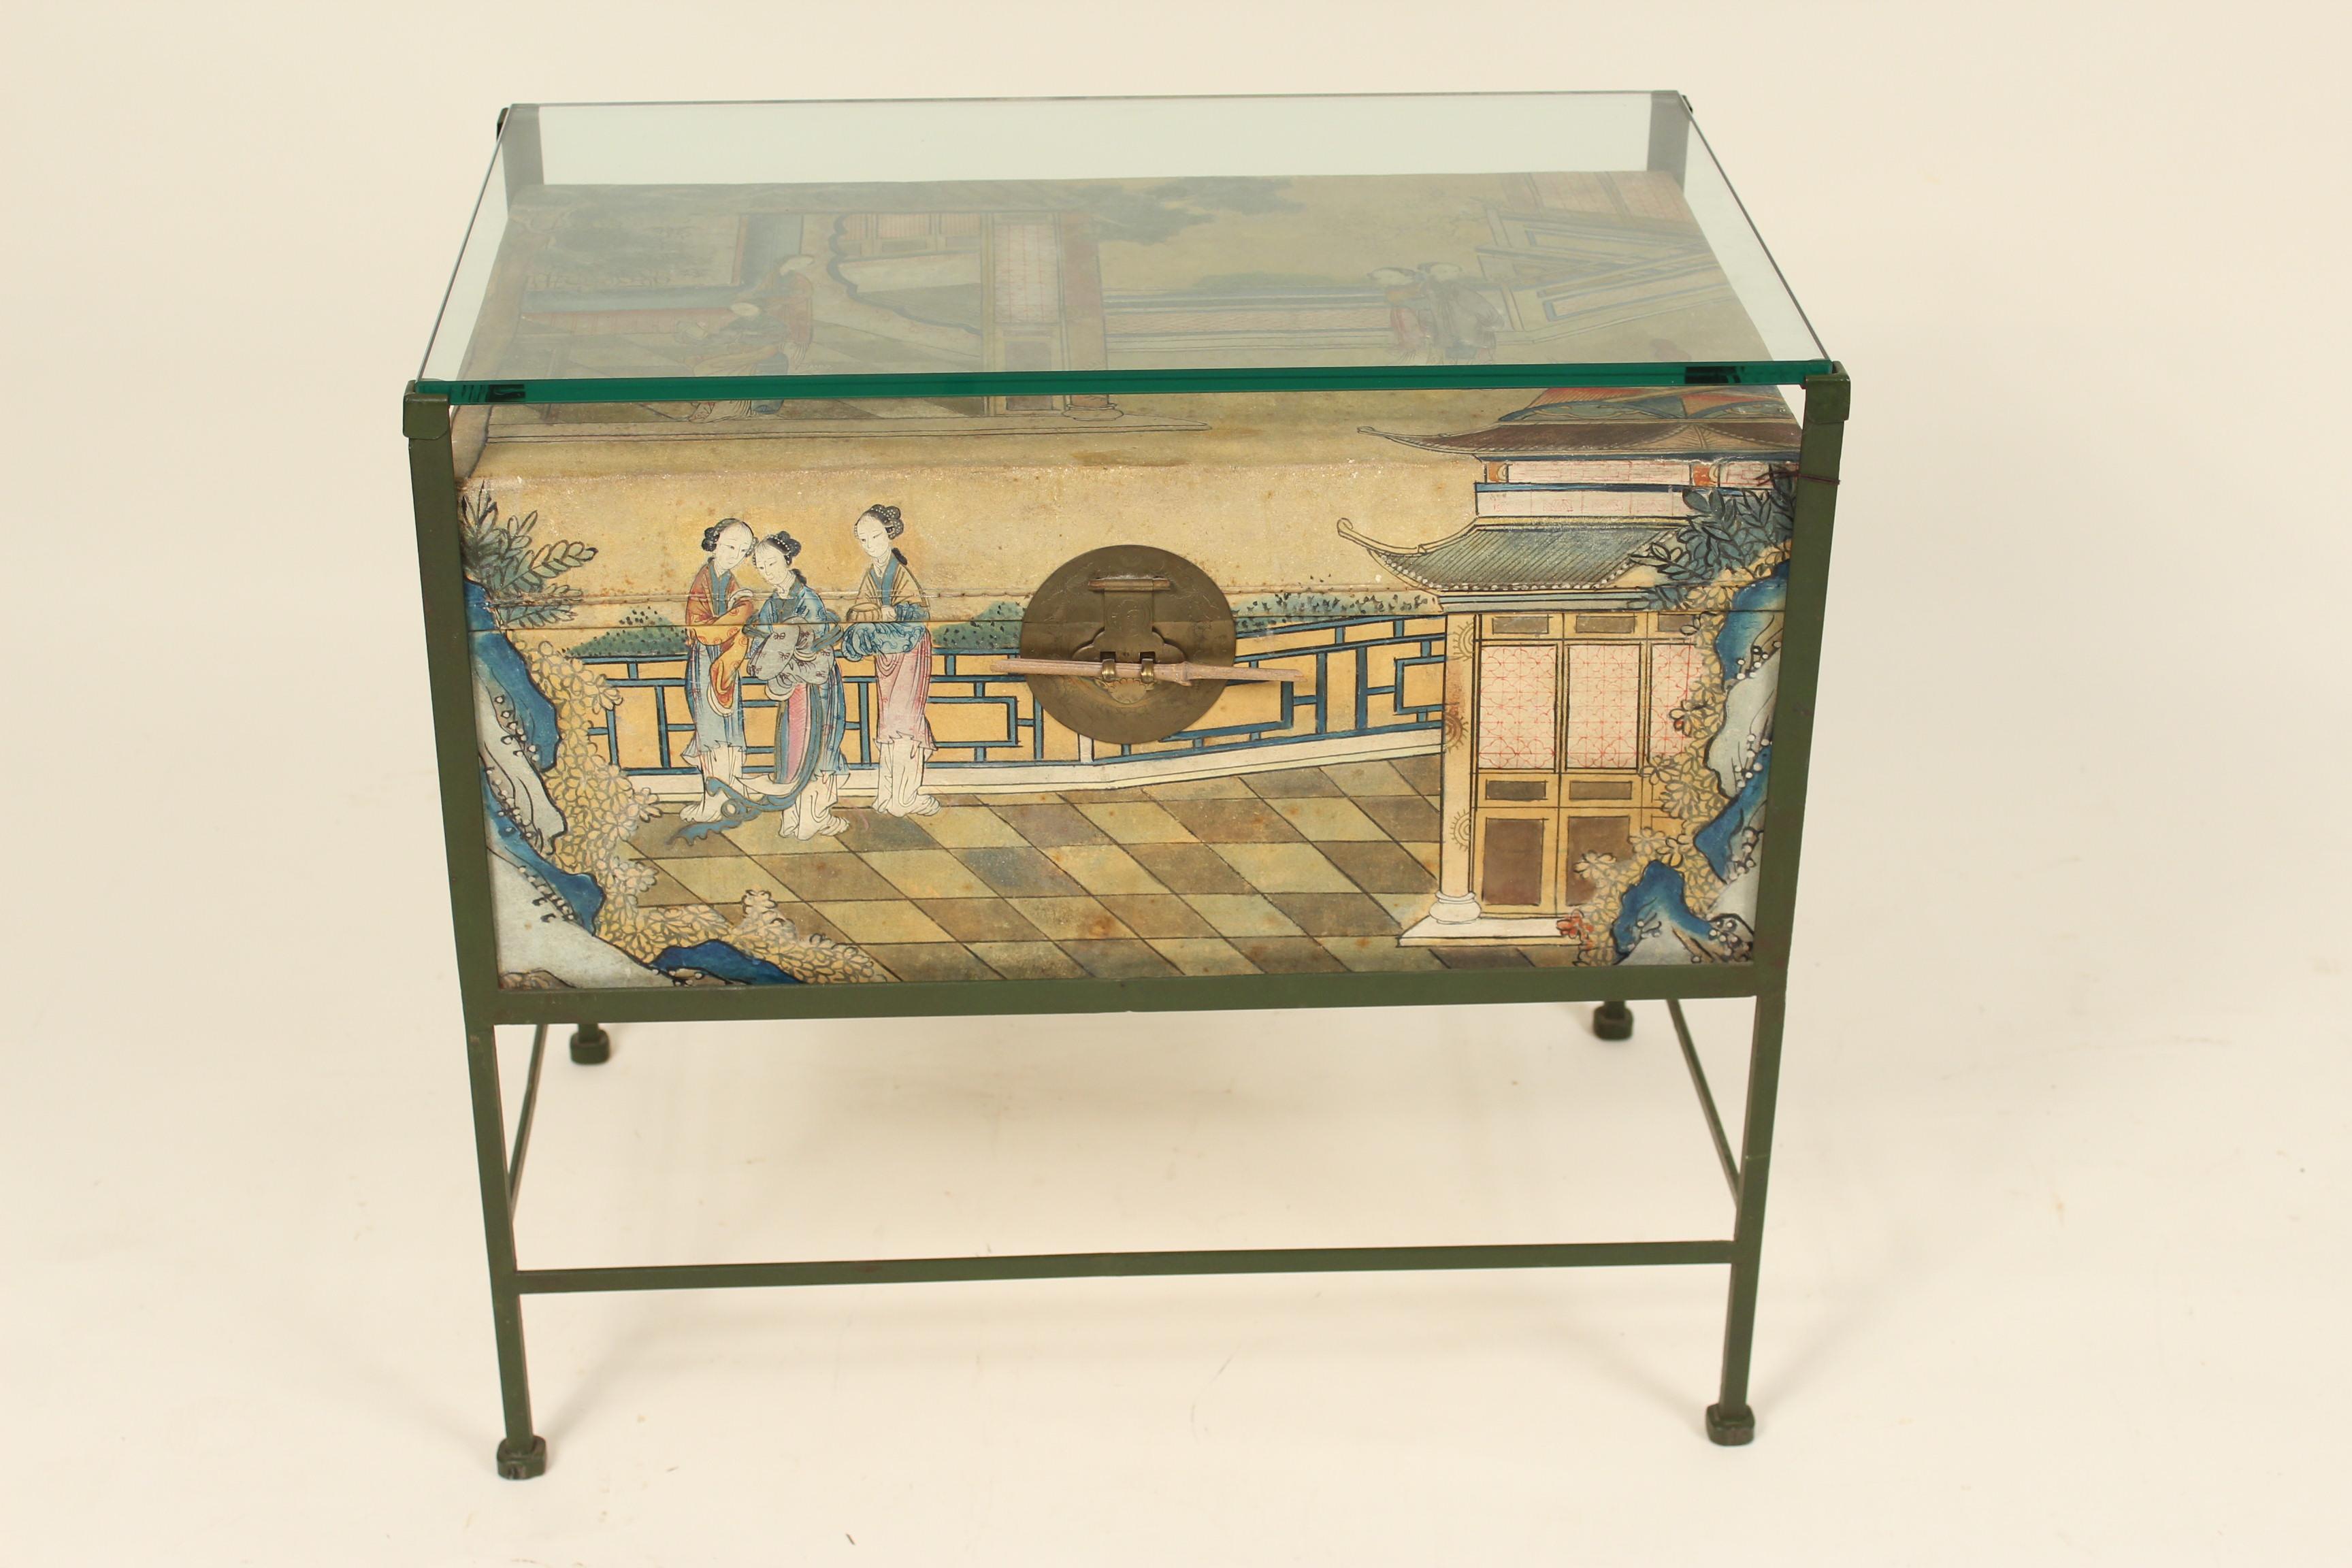 Chinese painted pigskin trunk mounted on an iron stand with glass top, to be used as an end table or coffee table,. The pigskin trunk was made circa 1920s, the iron stand and glass top are late 20th century.